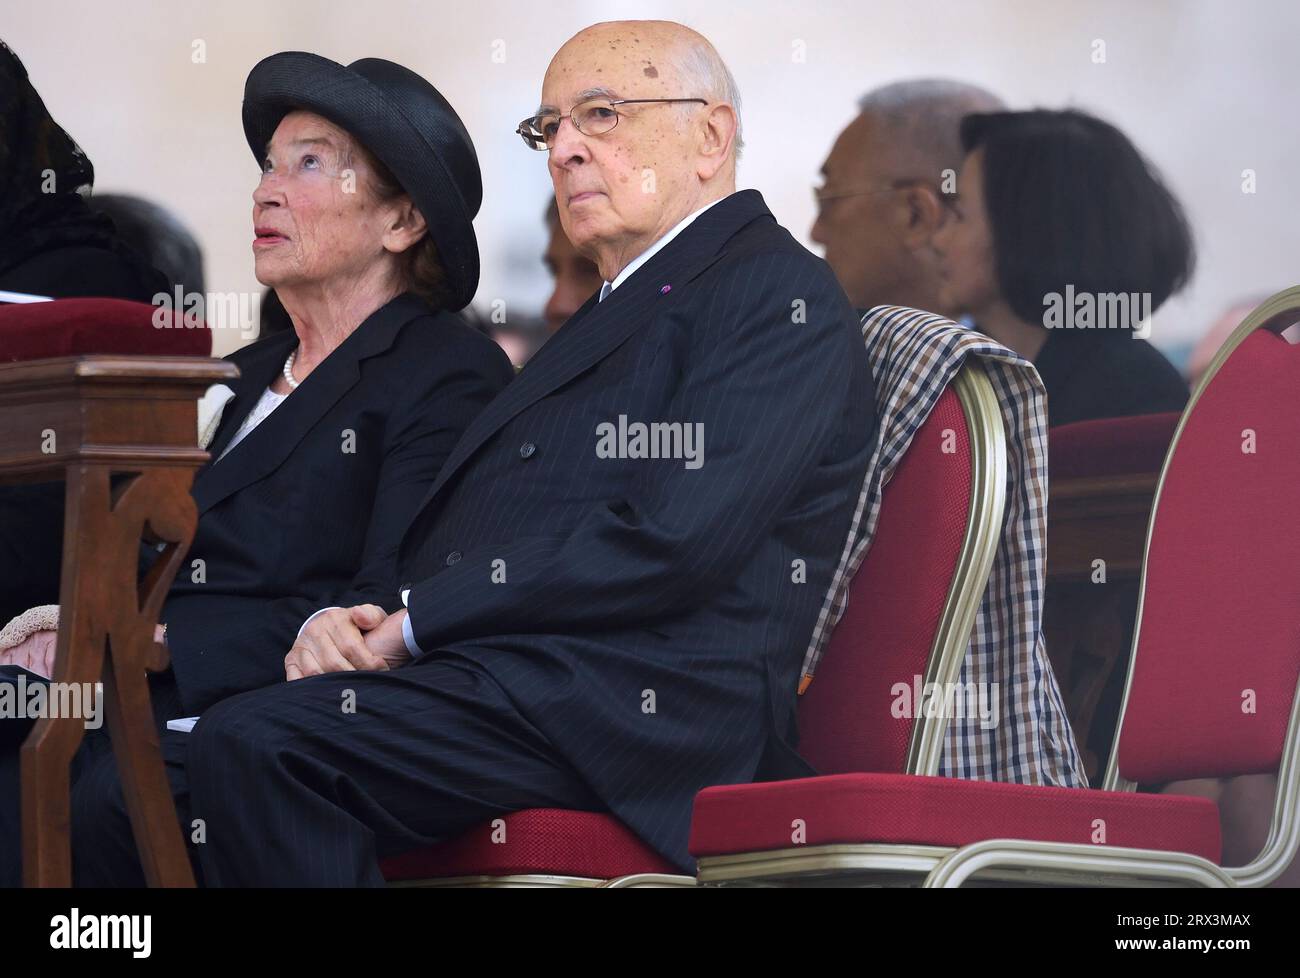 Italian President Giorgio Napolitano and his wife Clio Maria Bittoni in the picture: the canonisation mass of Popes John XXIII and John Paul II on St Peter's at the Vatican on April 27, 2014. Stock Photo